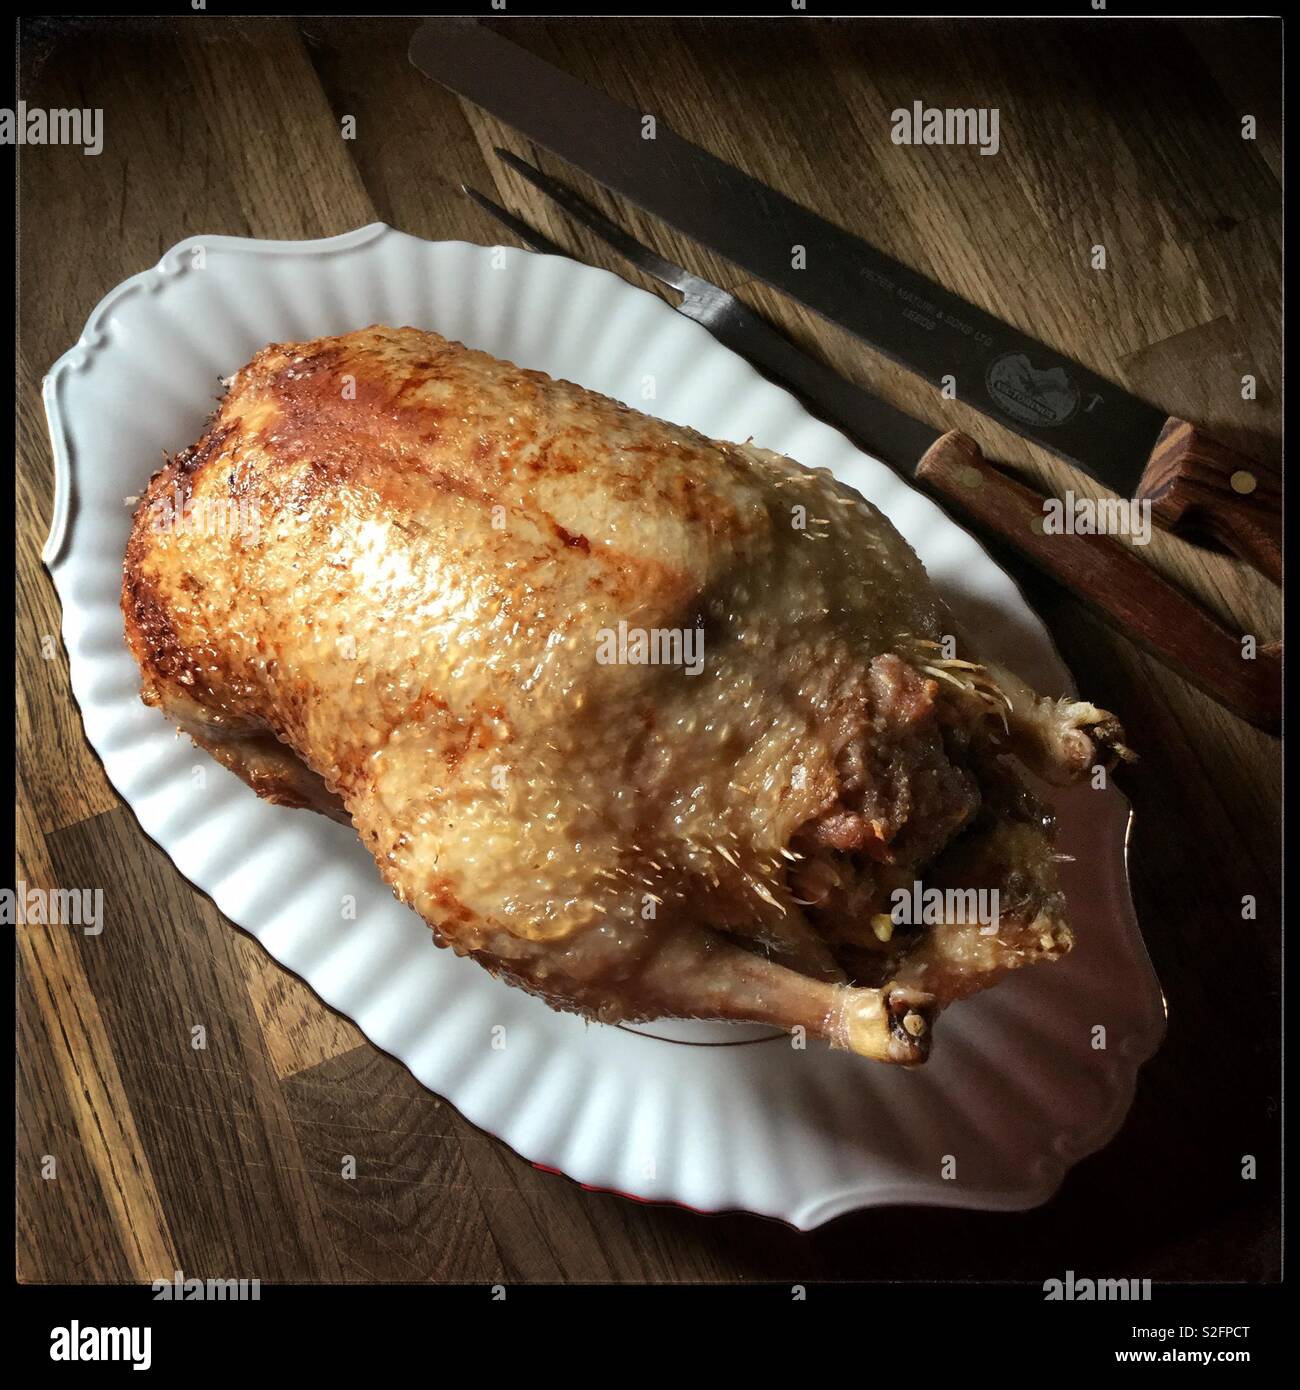 Roasted duck with carving knife. Stock Photo